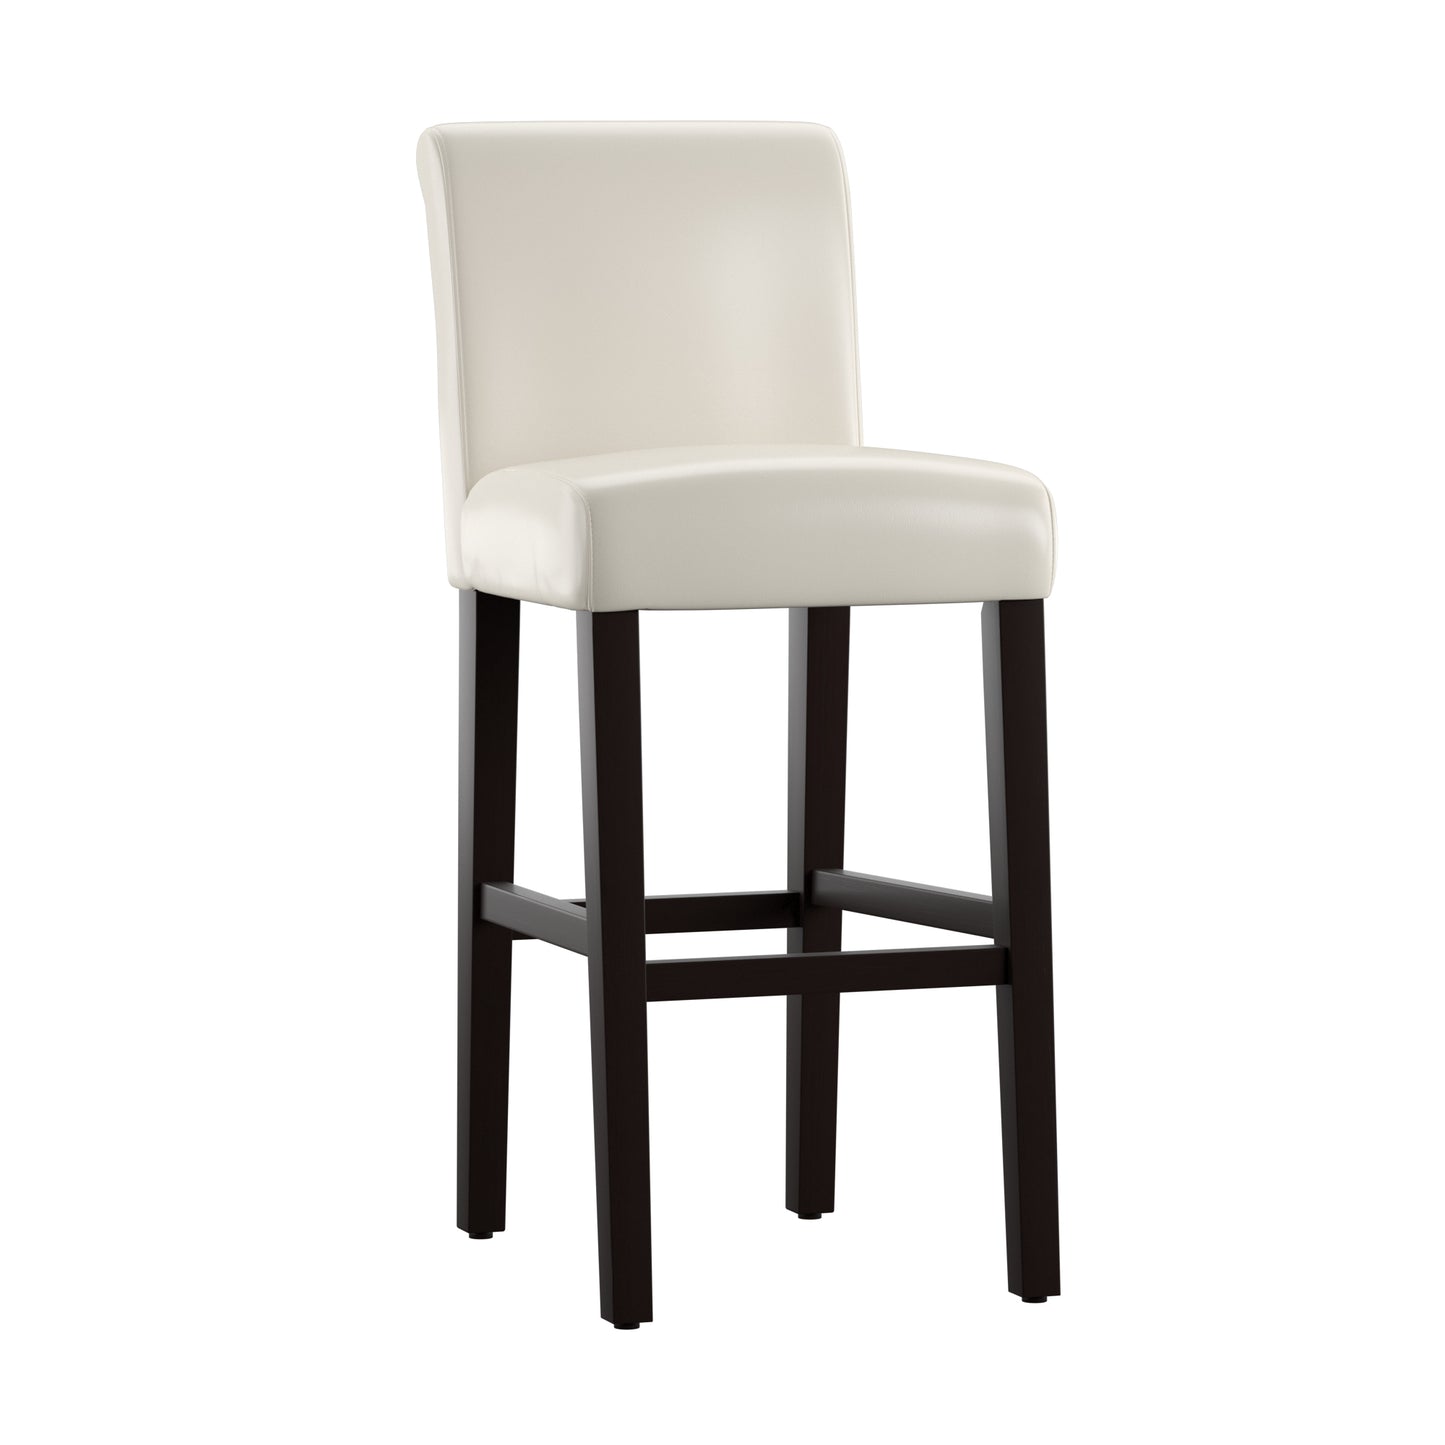 White Faux Leather 29-inch High Back Bar Stools (Set of 2)